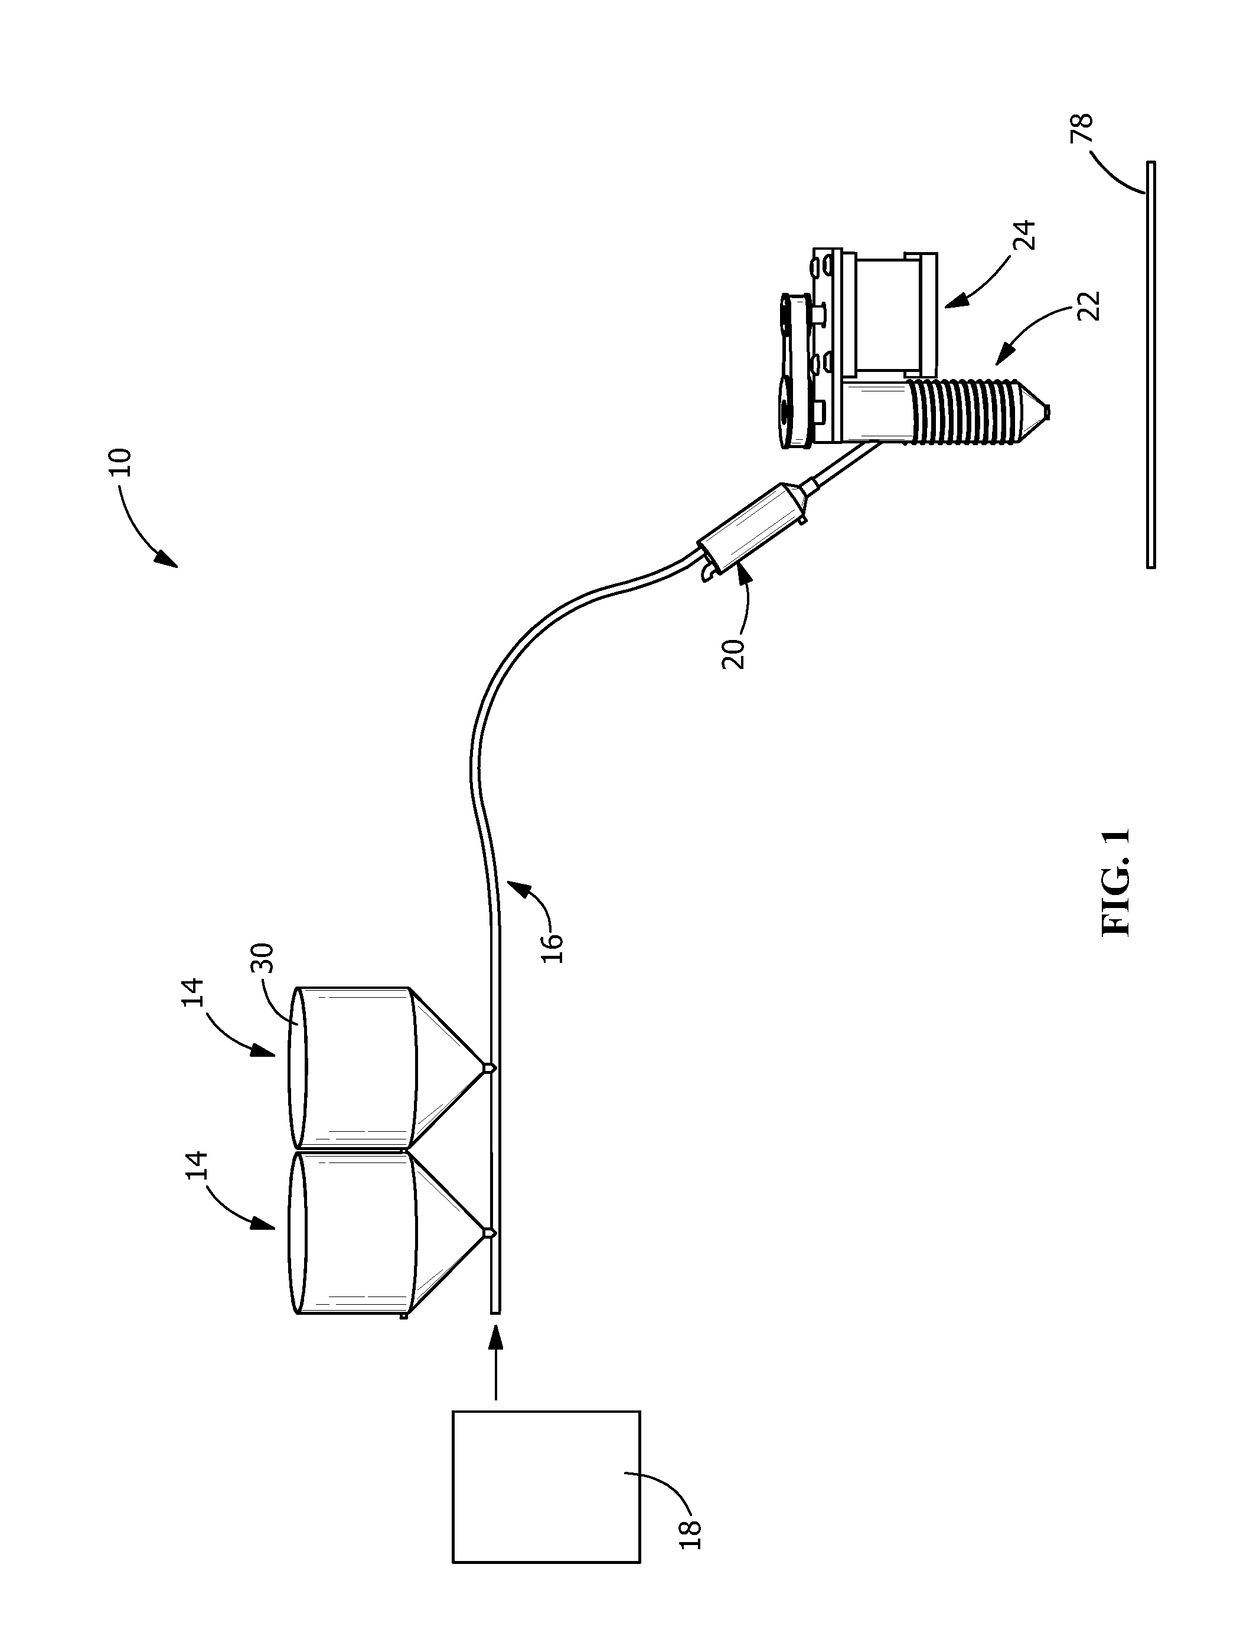 Additive manufacturing apparatus and method for delivering material to a discharge pump